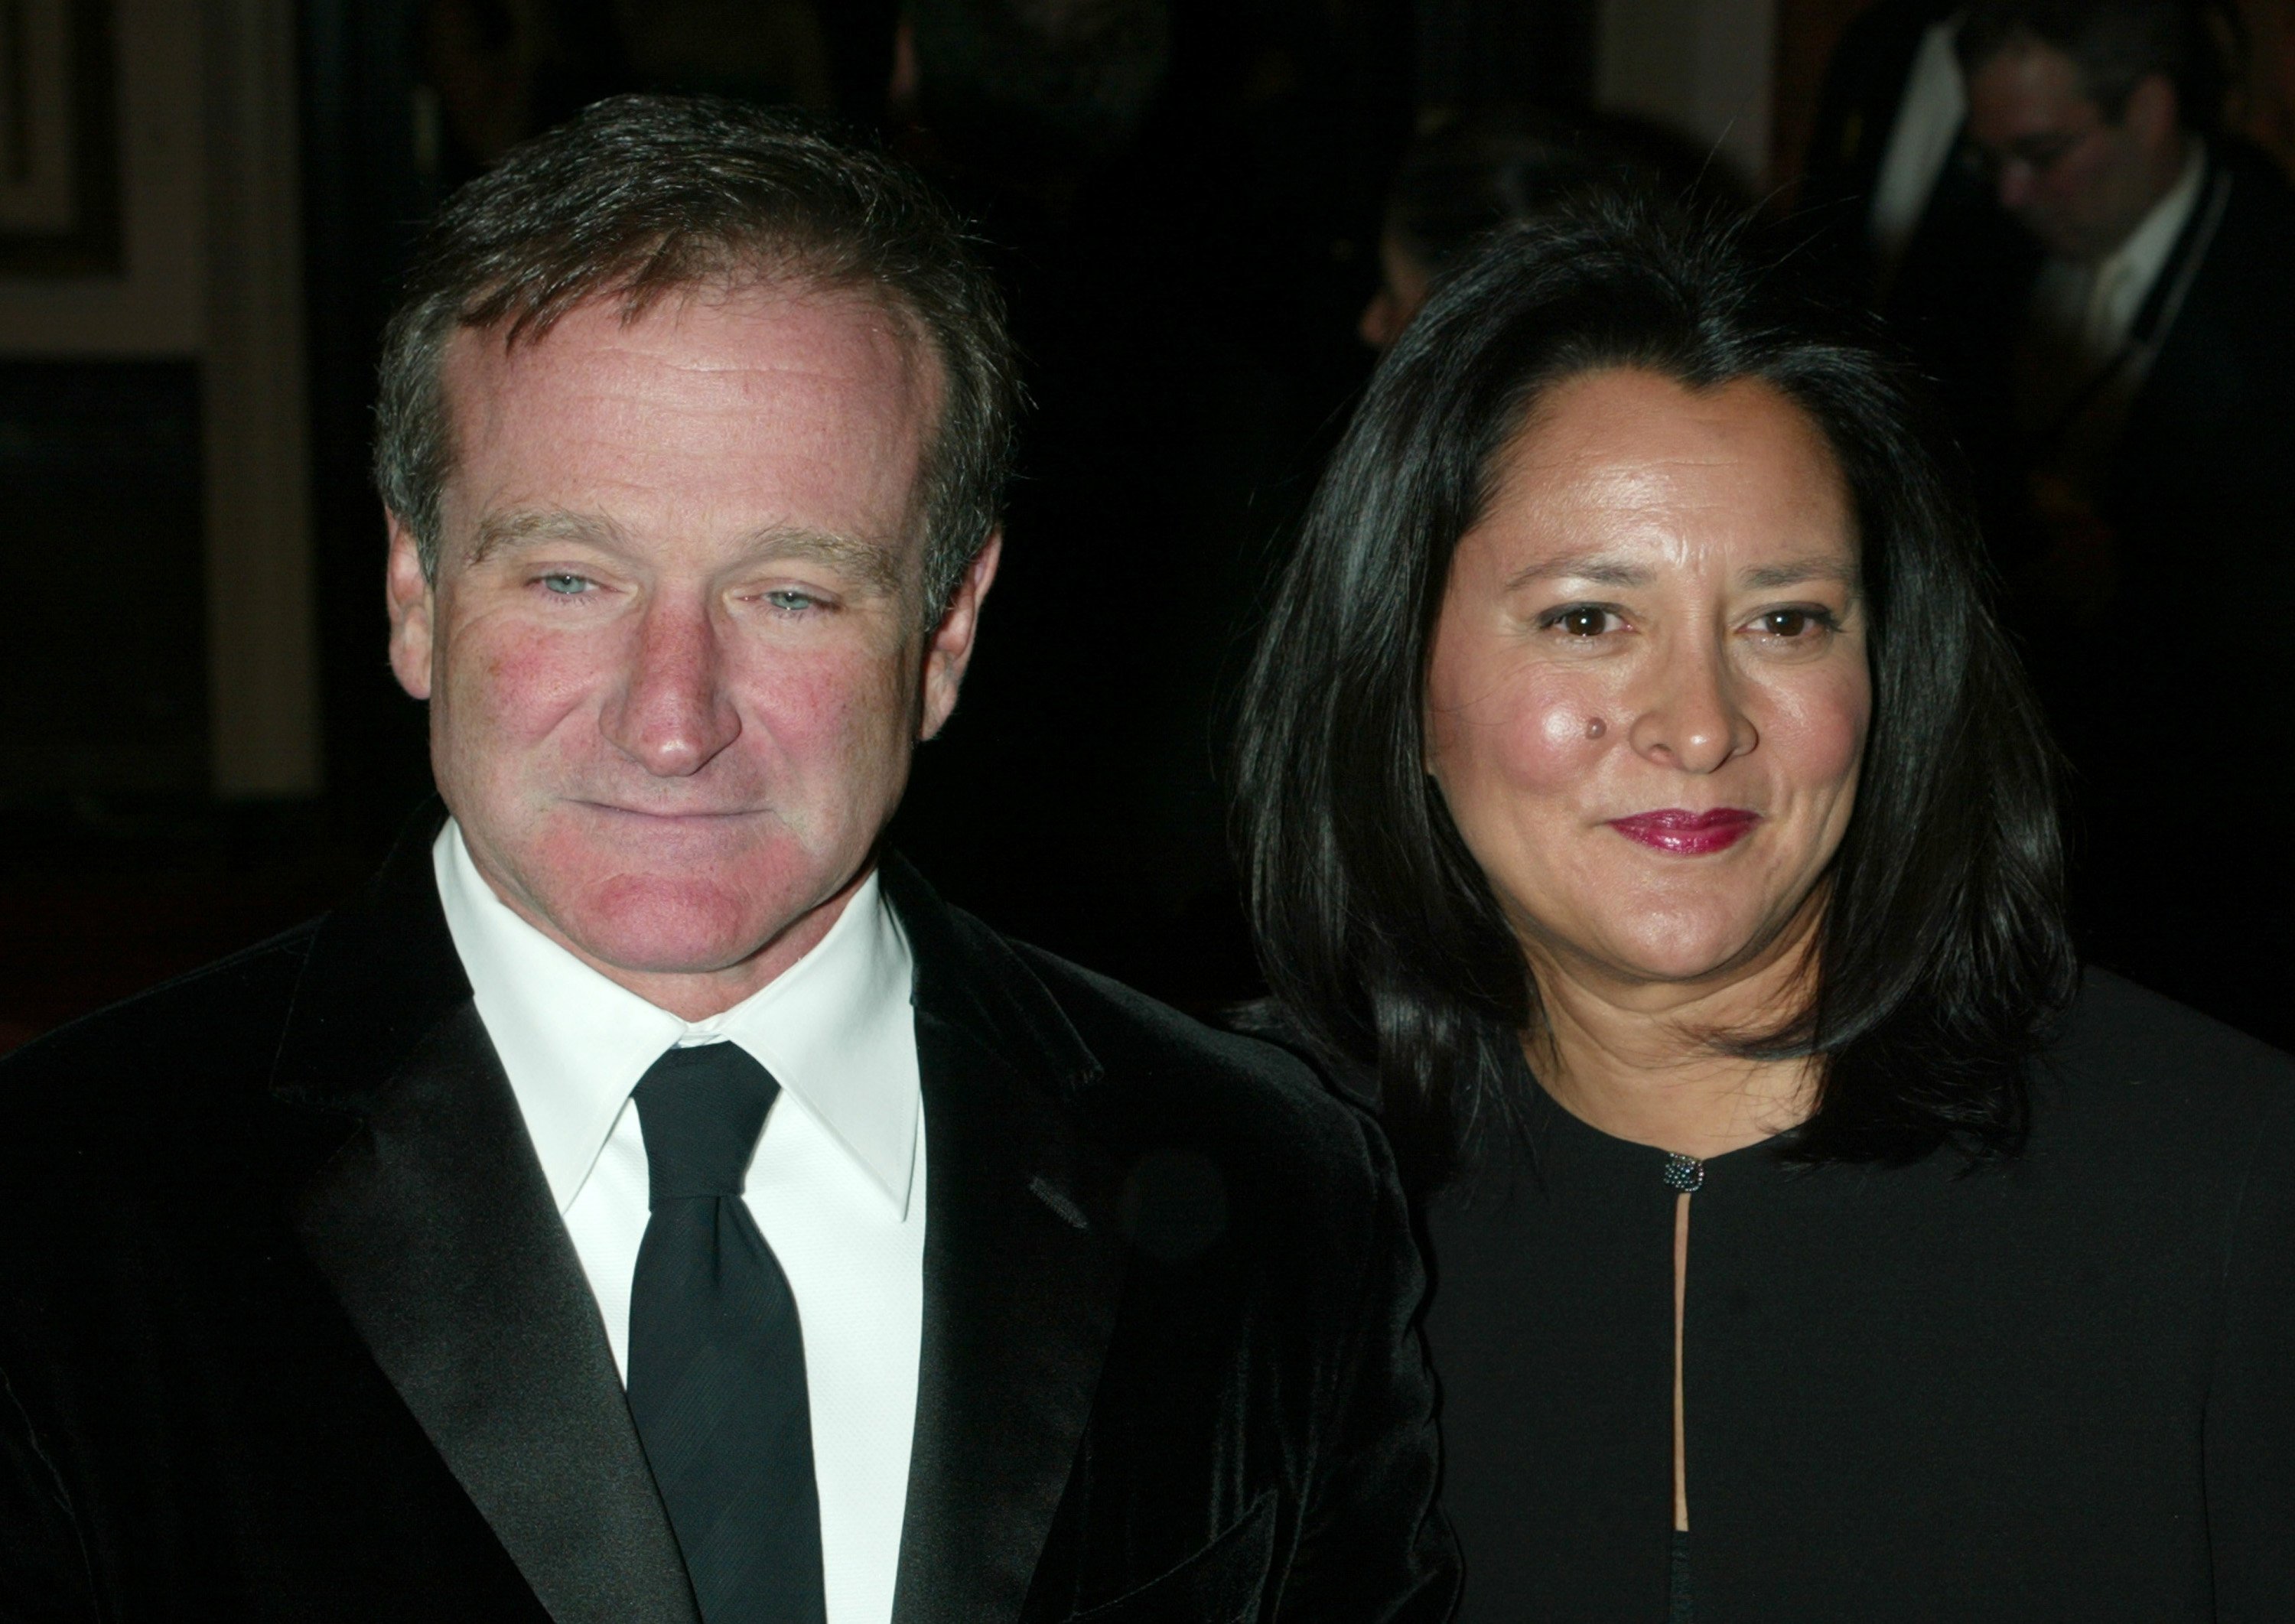 Robin Williams and wife Marsha during American Museum of the Moving Image Salutes Billy Crystal at The Waldorf Astoria in New York City, New York, United States. | Source: Getty Images